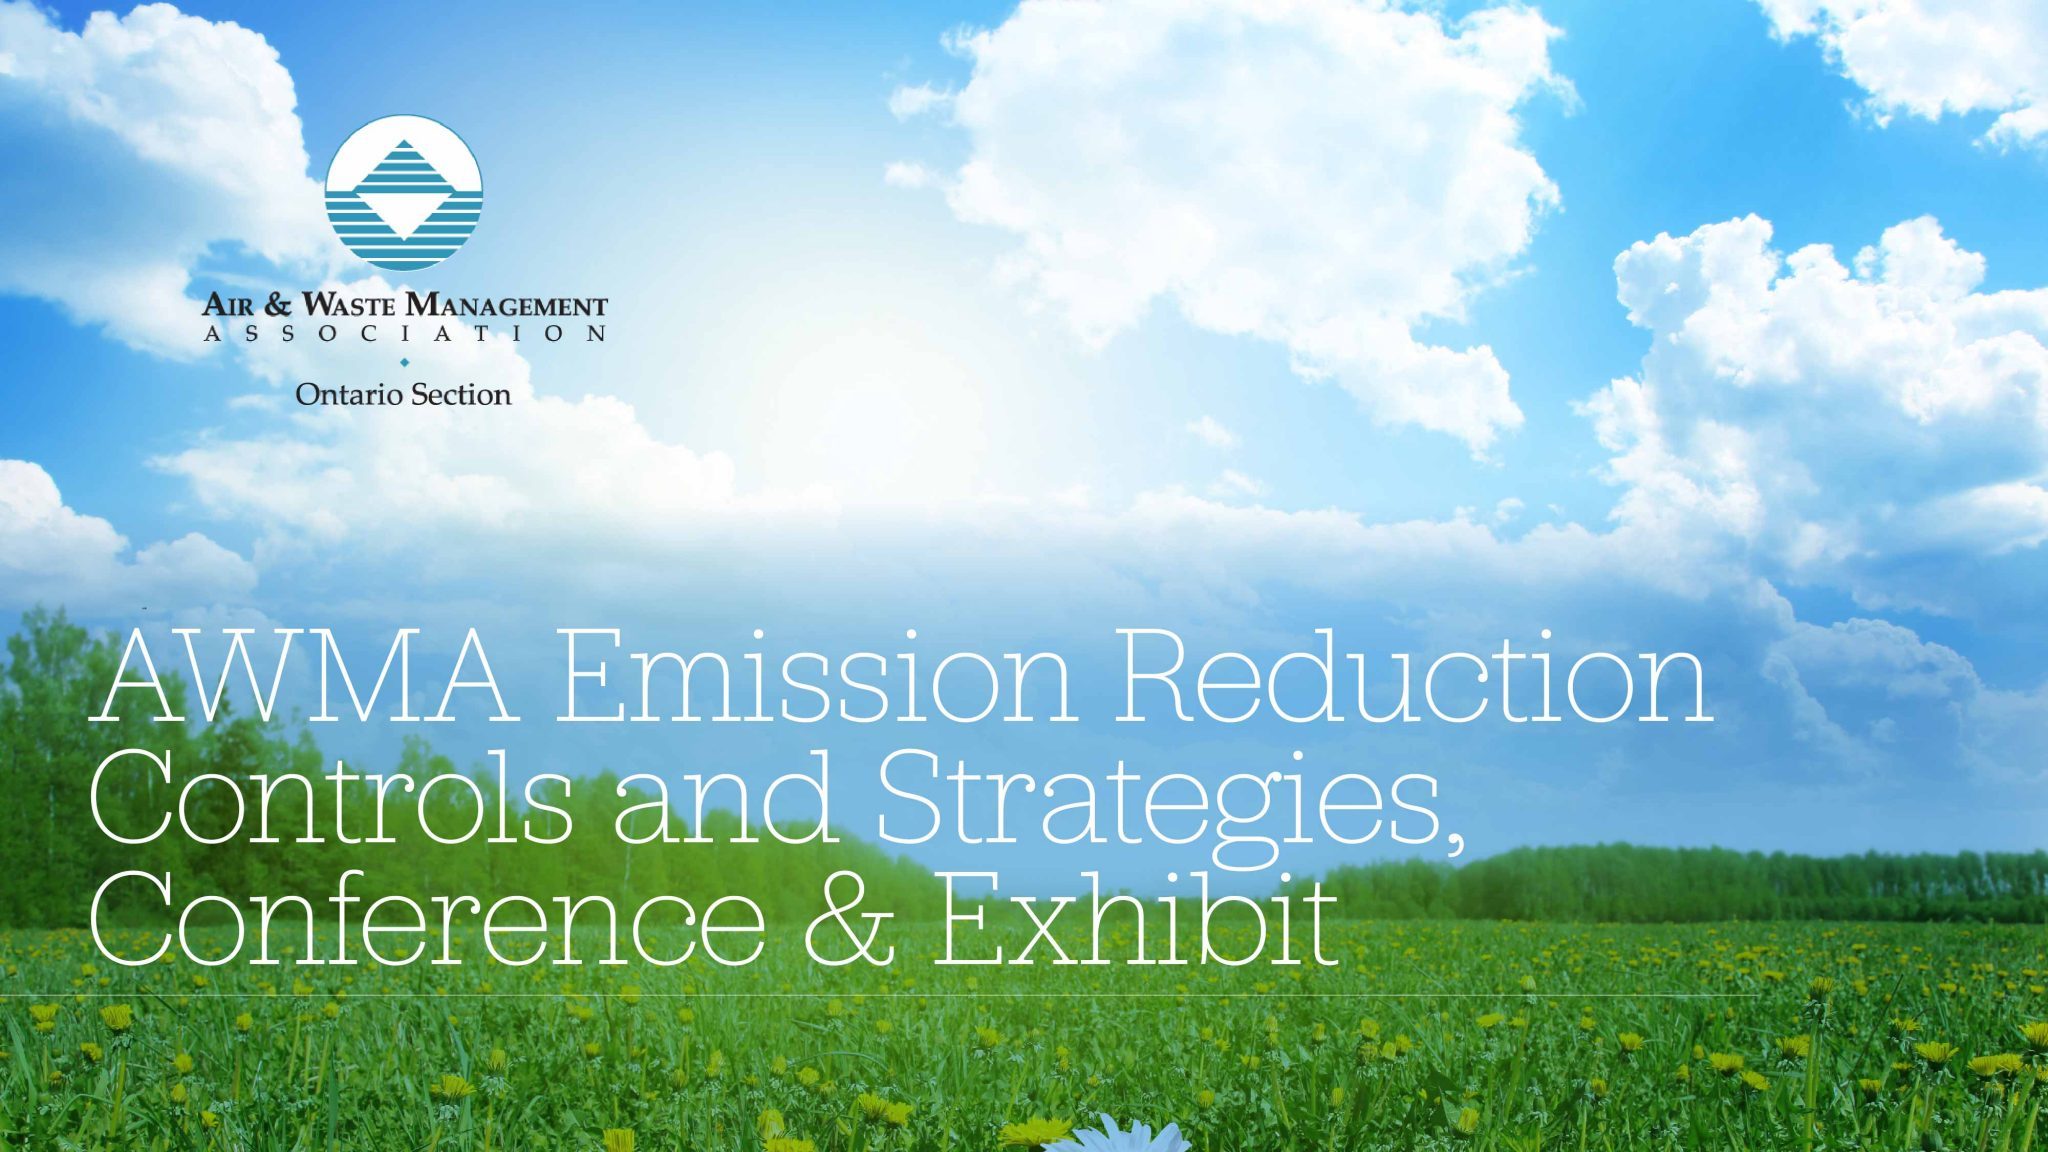 AWMA Emission Reduction Controls and Strategies, Conference & Exhibit